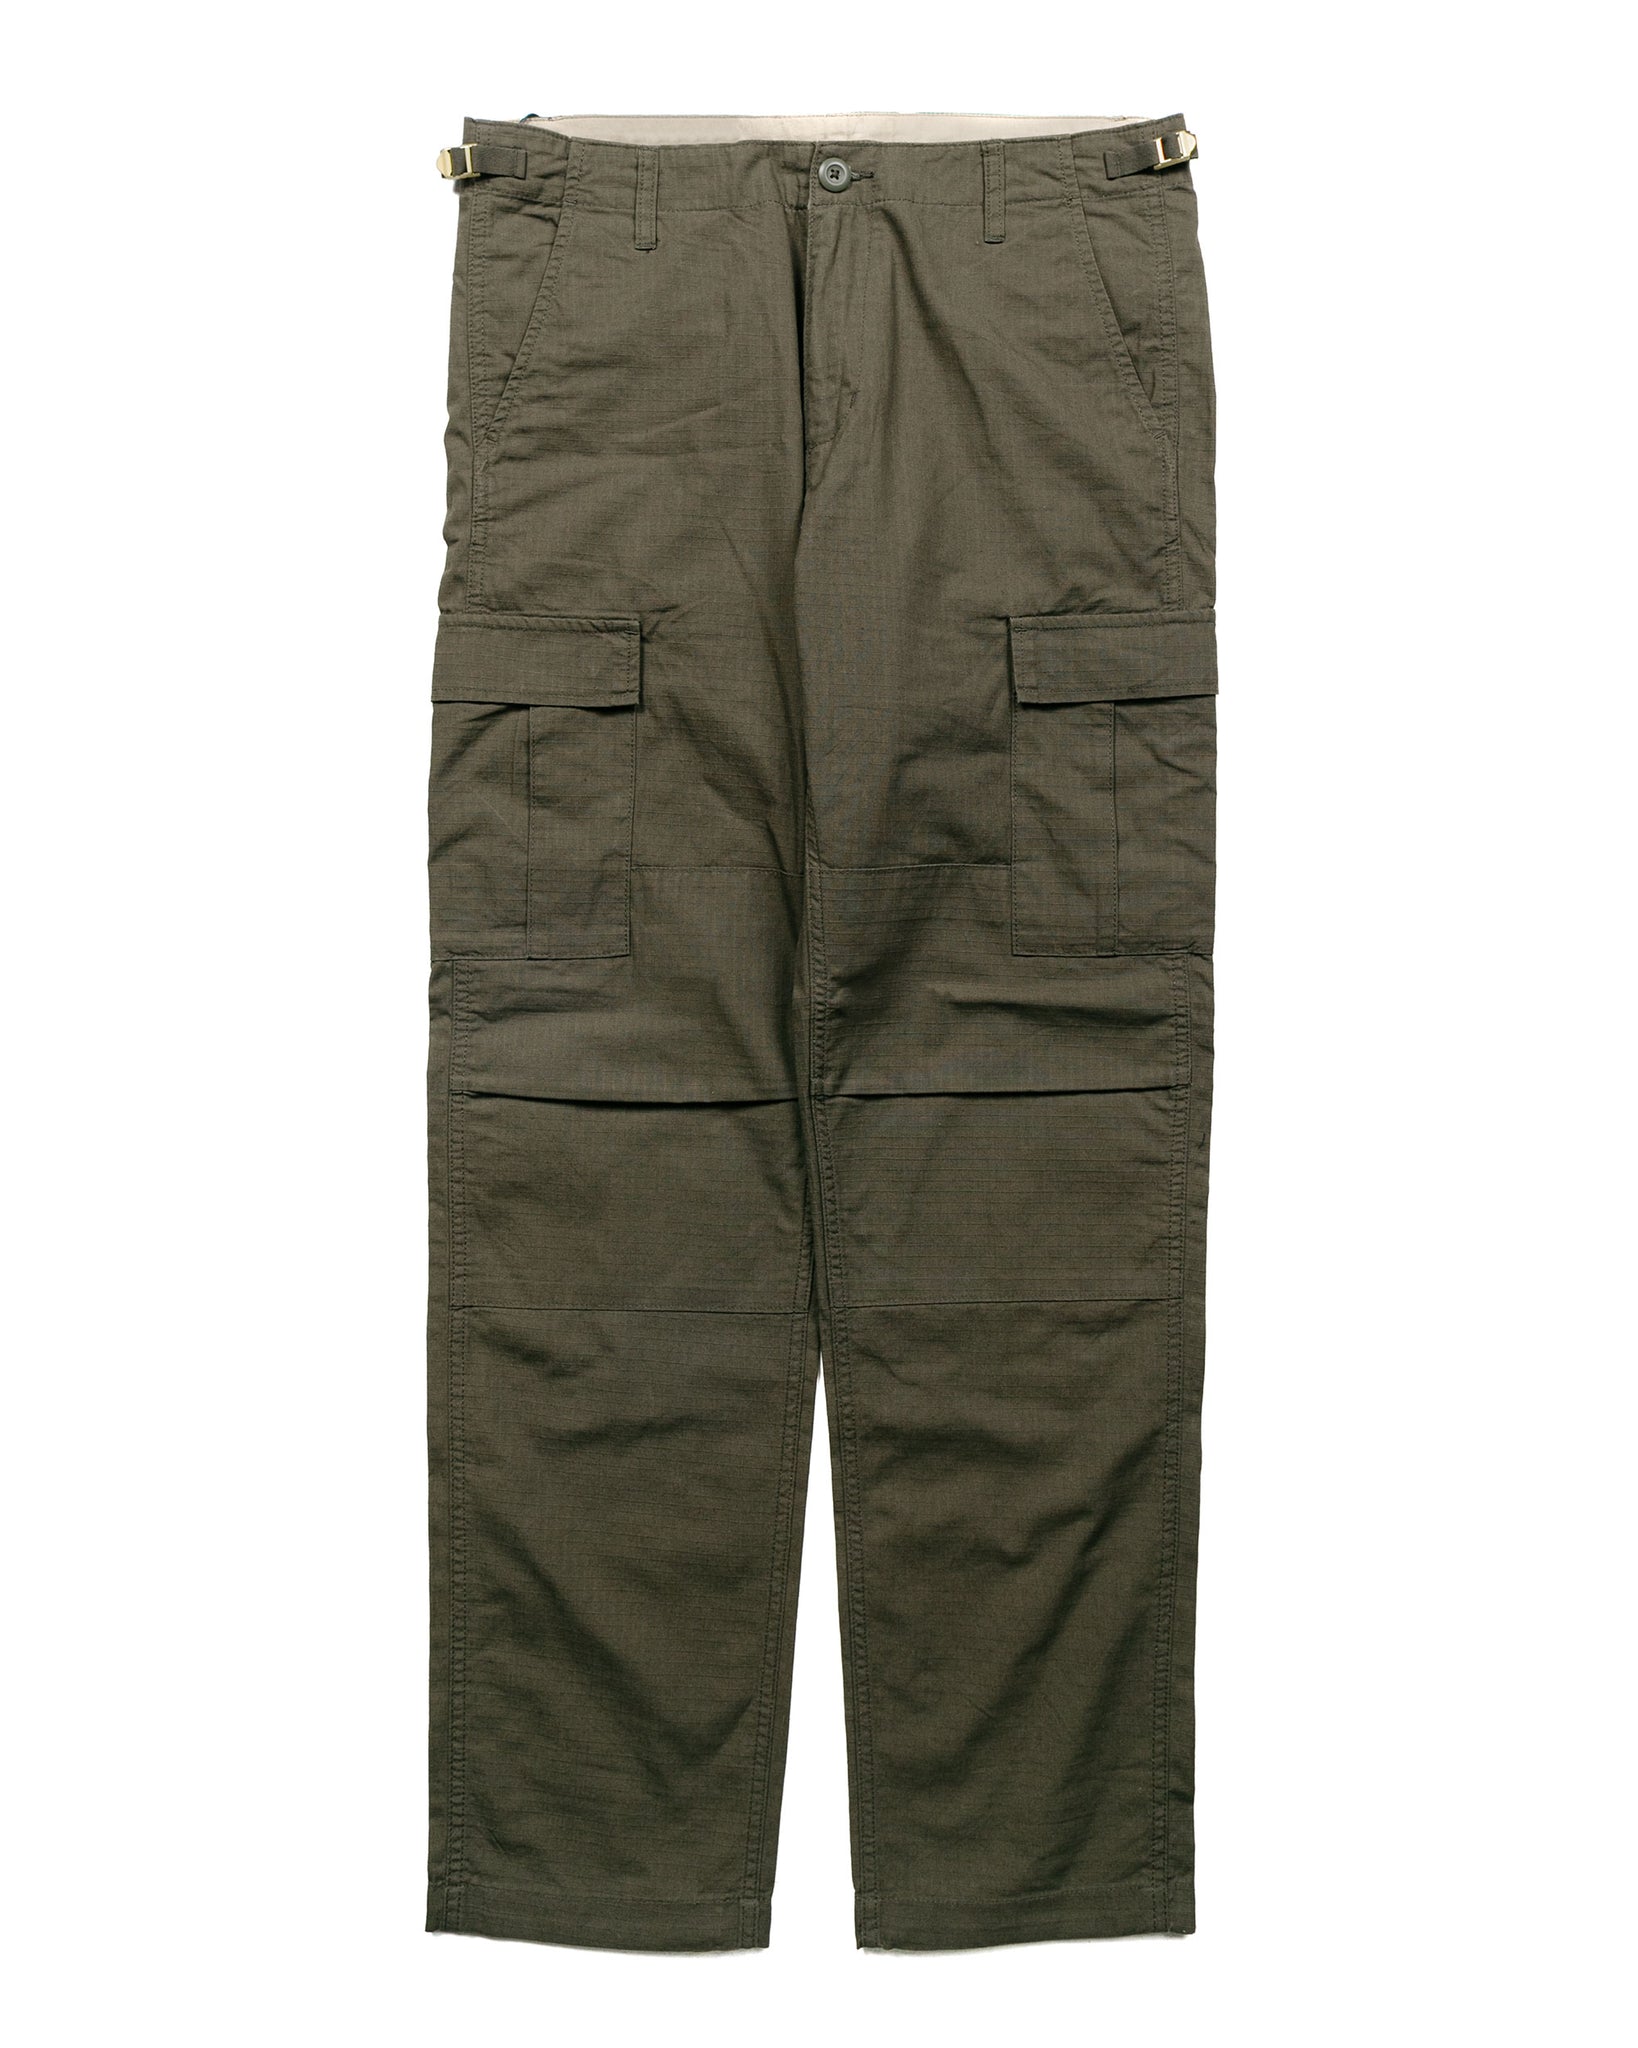 Carhartt WIP Aviation Cargo Pants - Cypress Rinsed in Green for